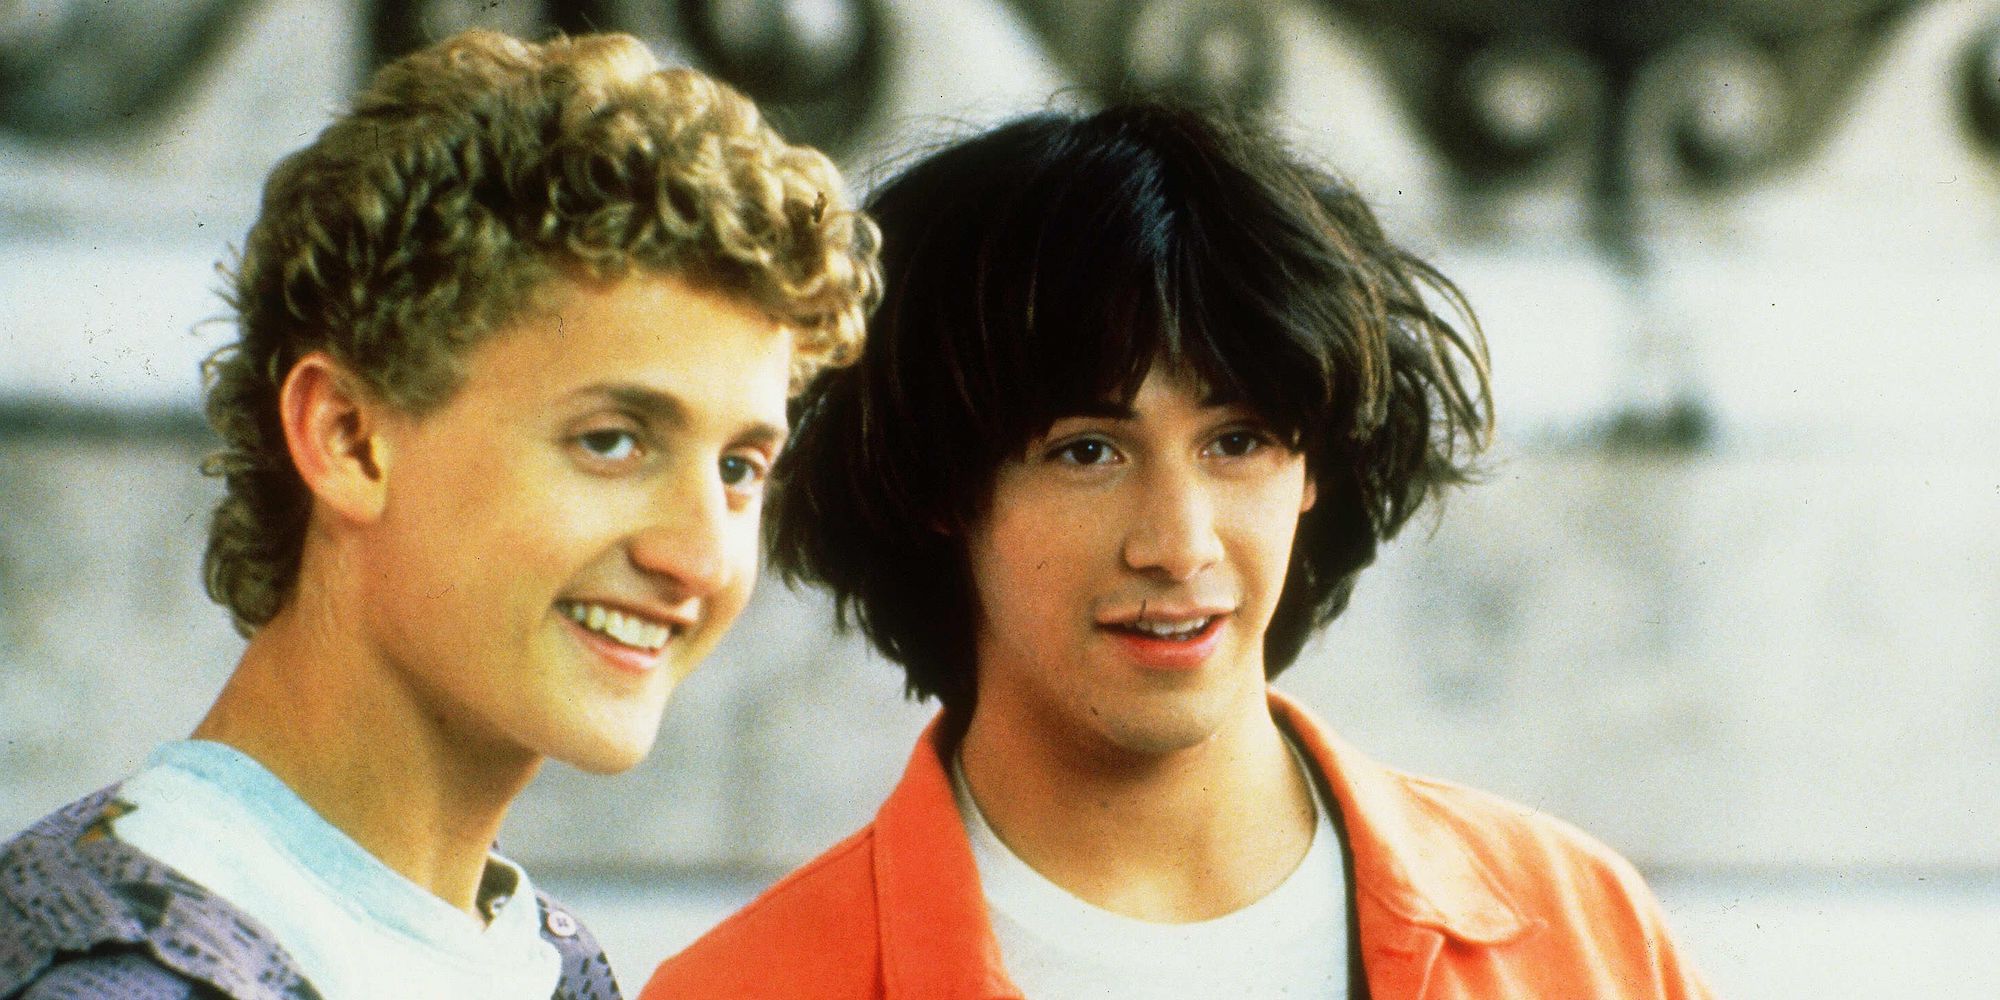 Bill & Ted Face The Music Release Date Pushed Back Two Weeks